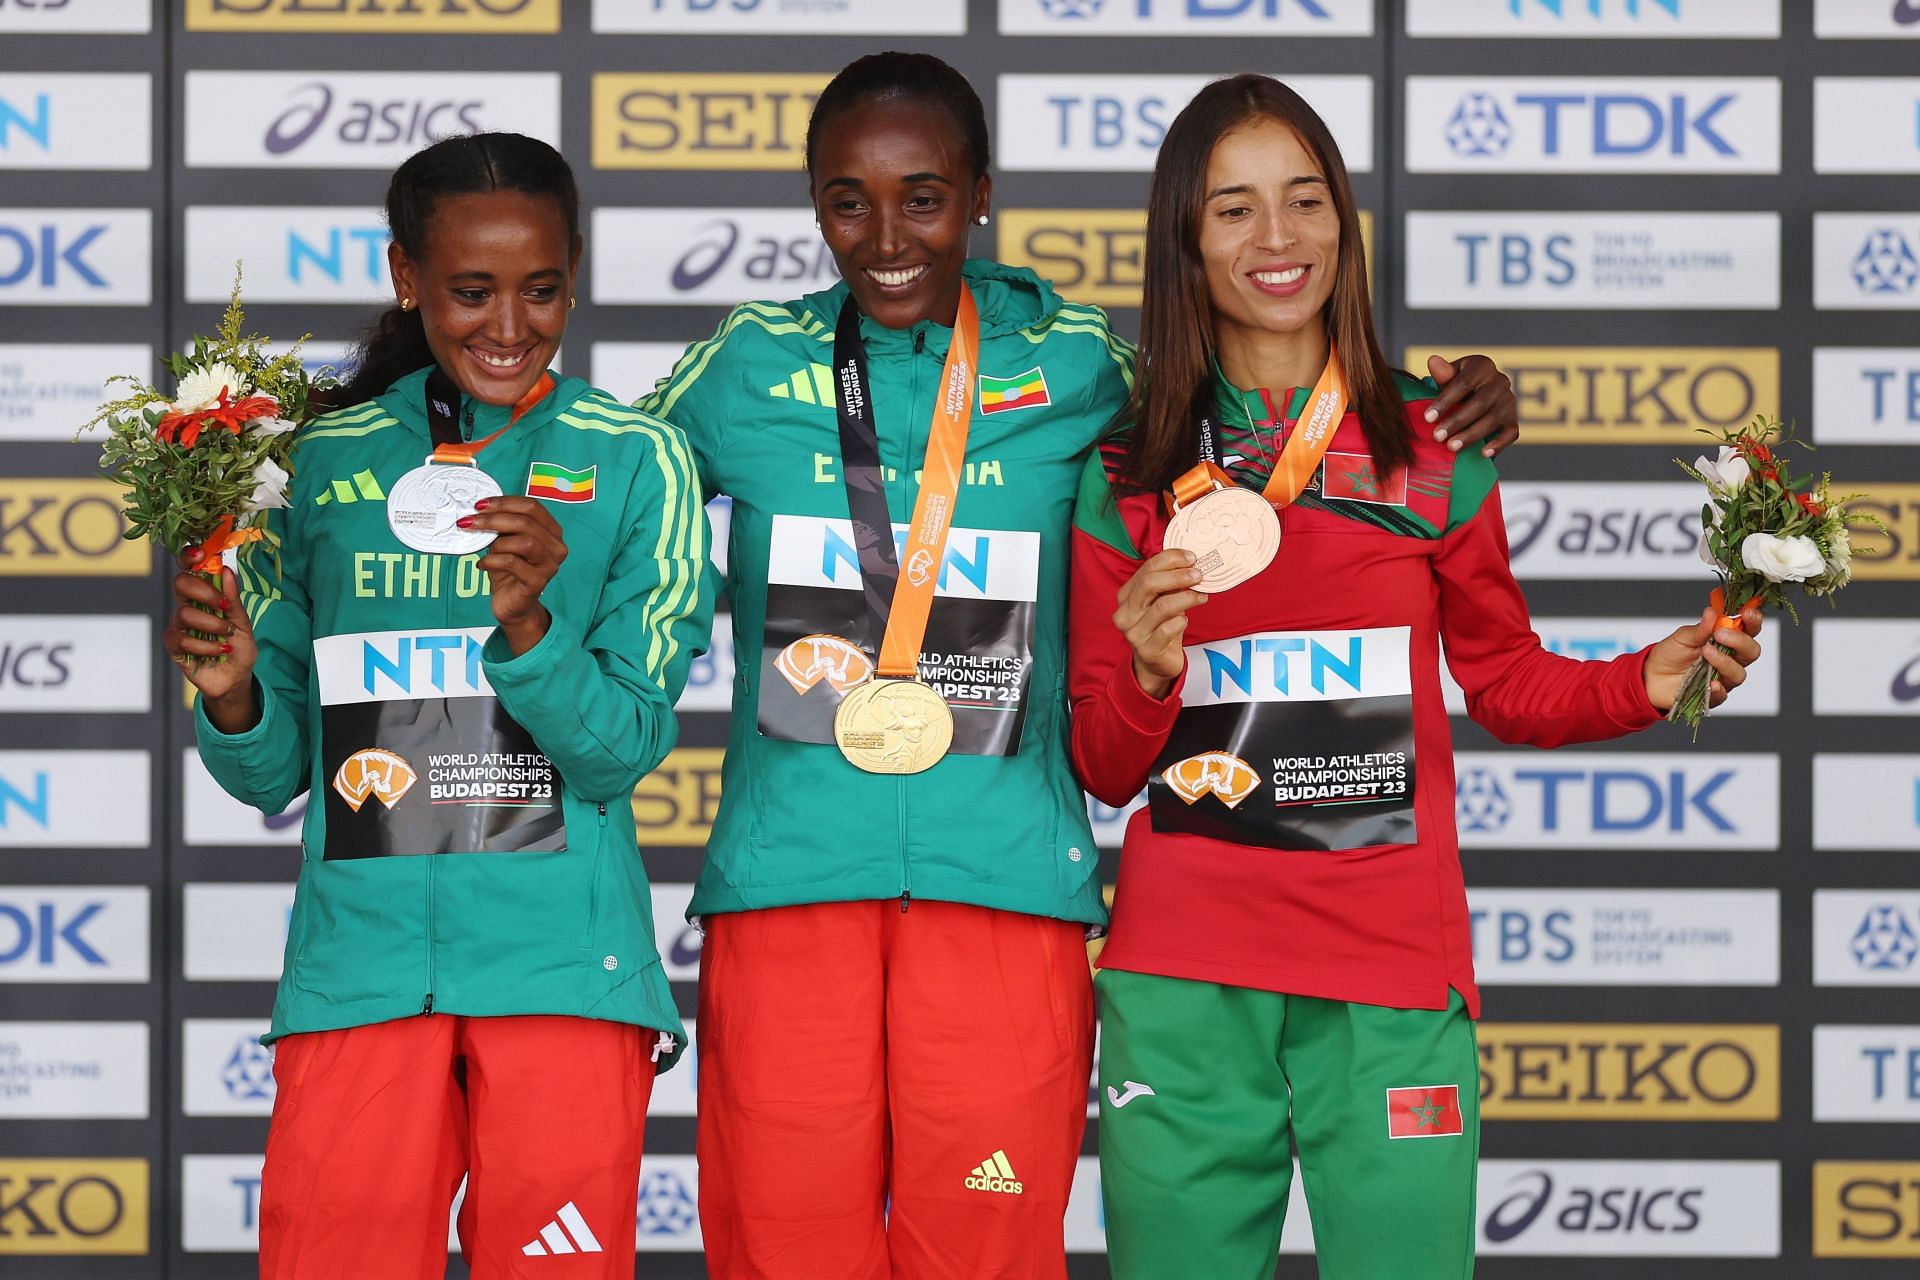 (L-R) Silver medalist Gotytom Gebreslase of Team Ethiopia, Gold medalist Amane Beriso Shankule of Team Ethiopia, and Bronze medalist Fatima Ezzahra Gardadi of Team Morocco pose for a photo during the medal ceremony for the Women&#039;s Marathon during day eight of the World Athletics Championships Budapest 2023